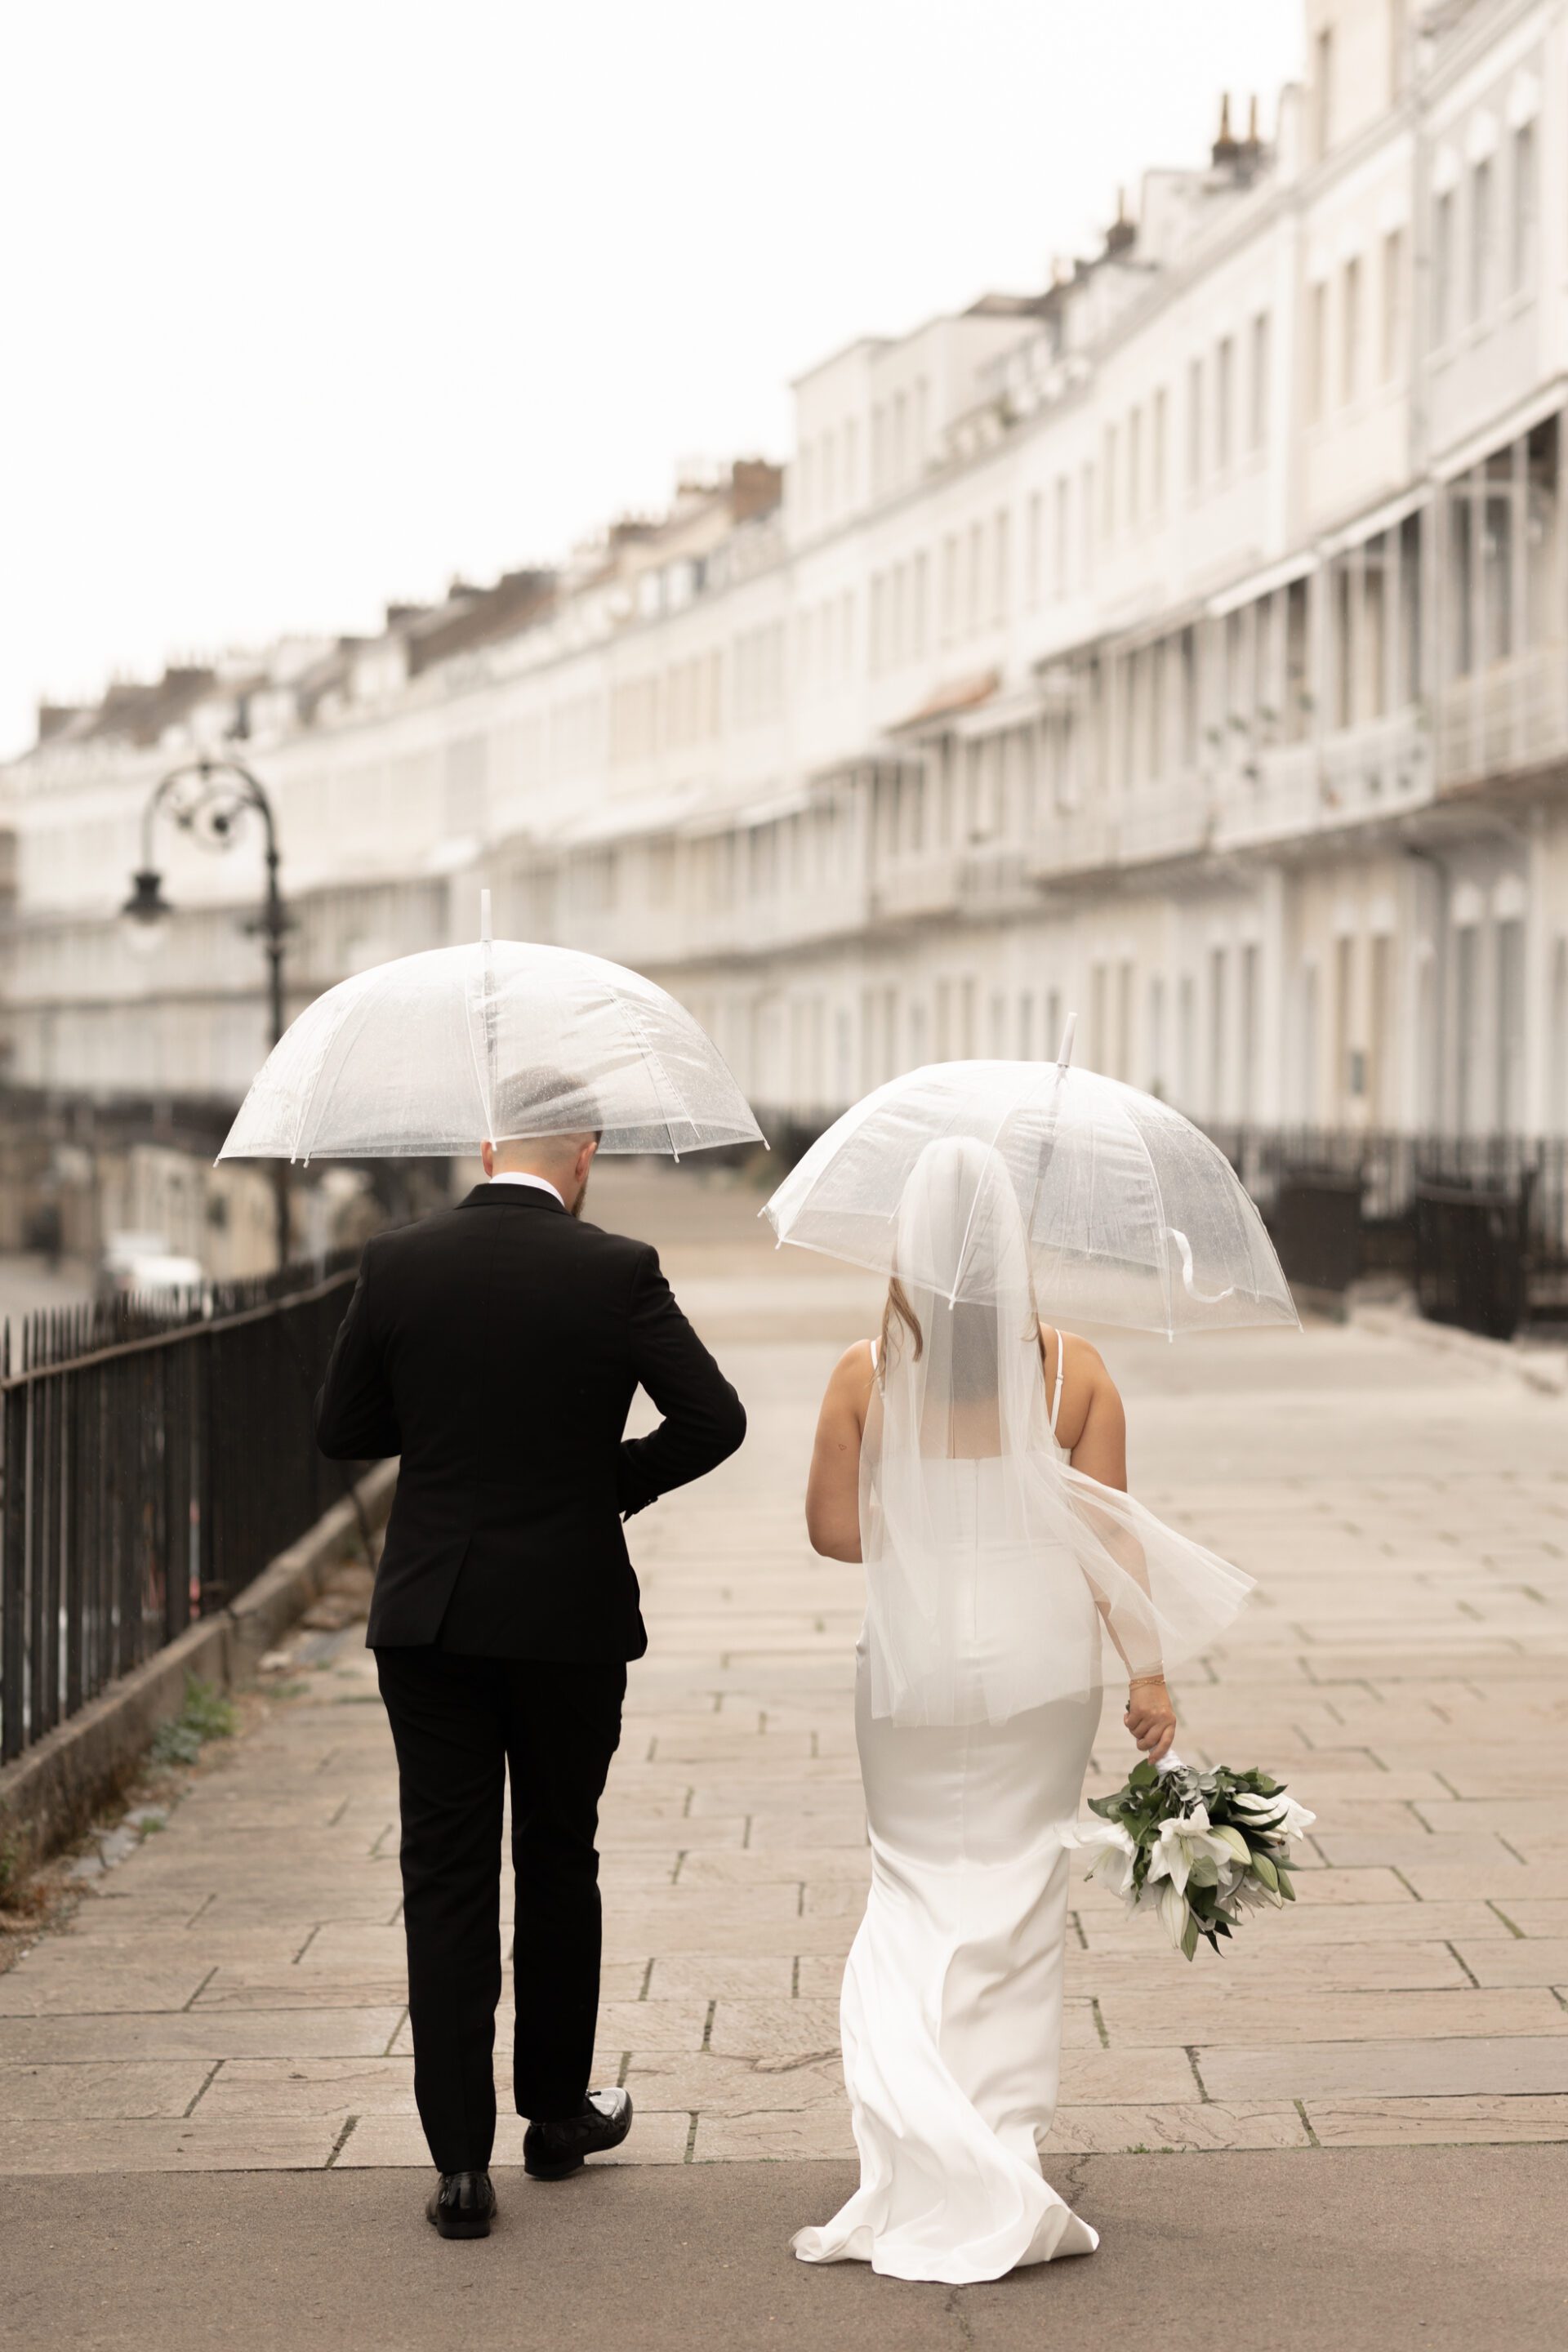 Our bride and groom explore Clifton, Bristol during our couple portrait session